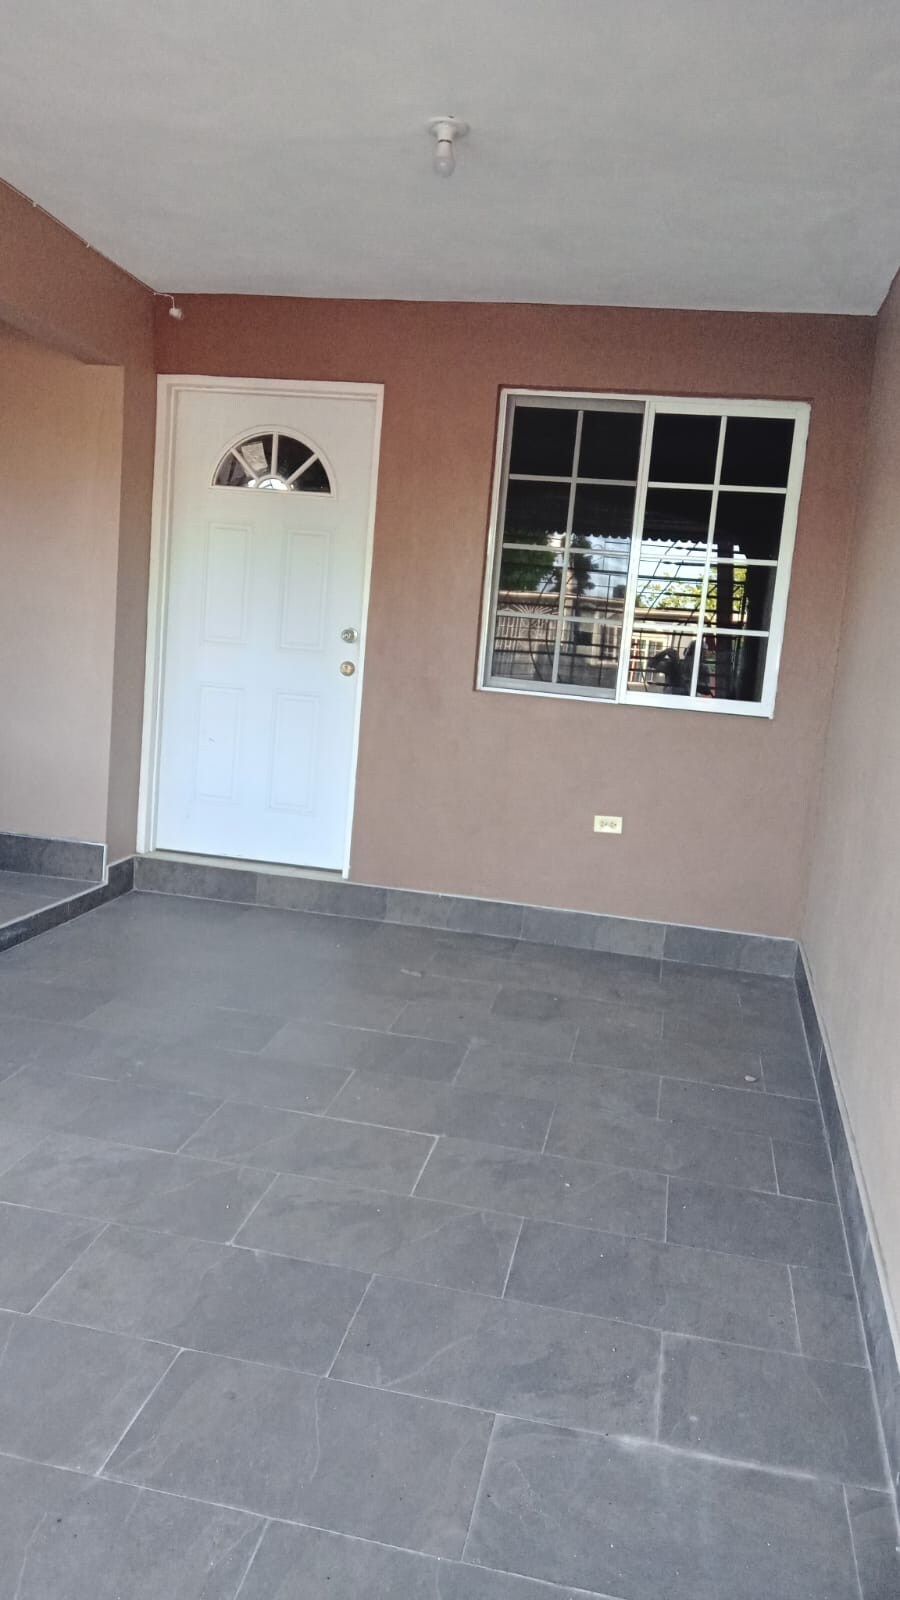 3 bedrooms 2 bathrooms, 7 East Greater Portmore